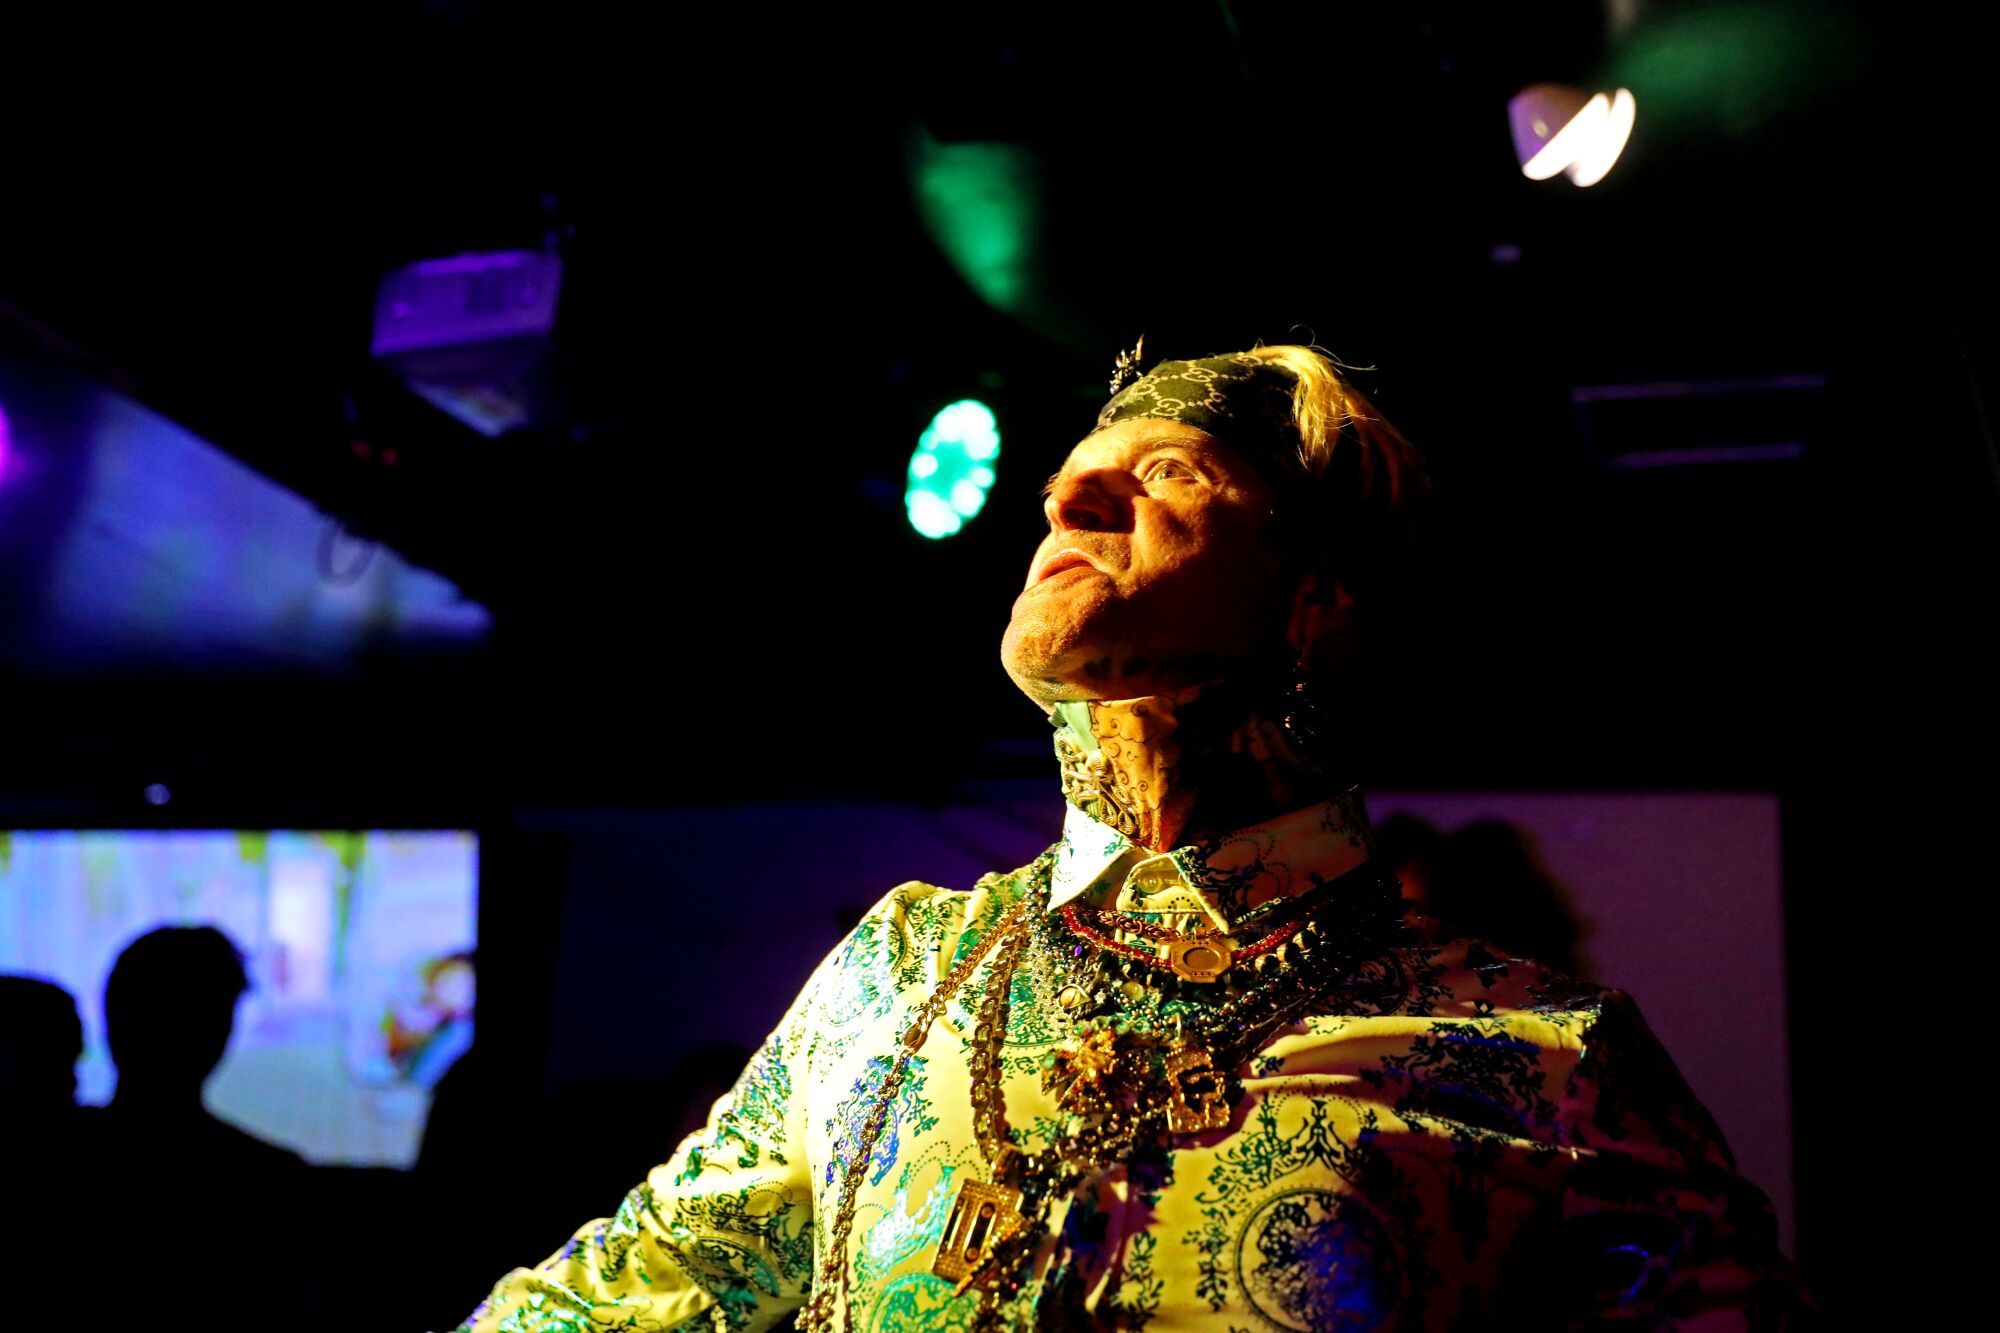 A man in a decorated collared yellow shirt and necklaces sings